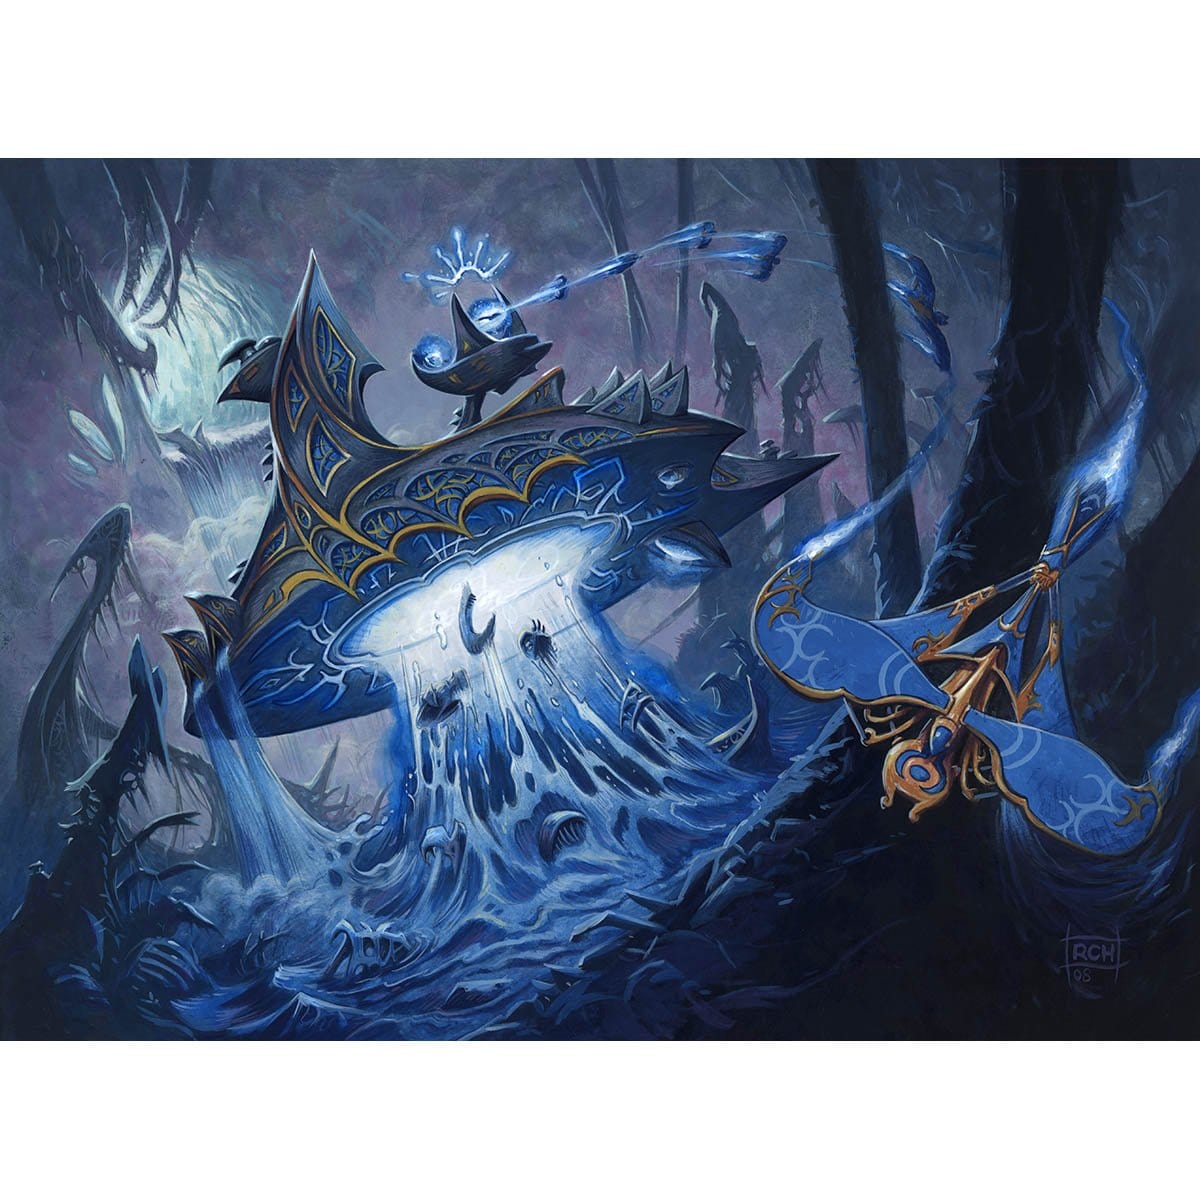 Thopter Foundry Print - Print - Original Magic Art - Accessories for Magic the Gathering and other card games